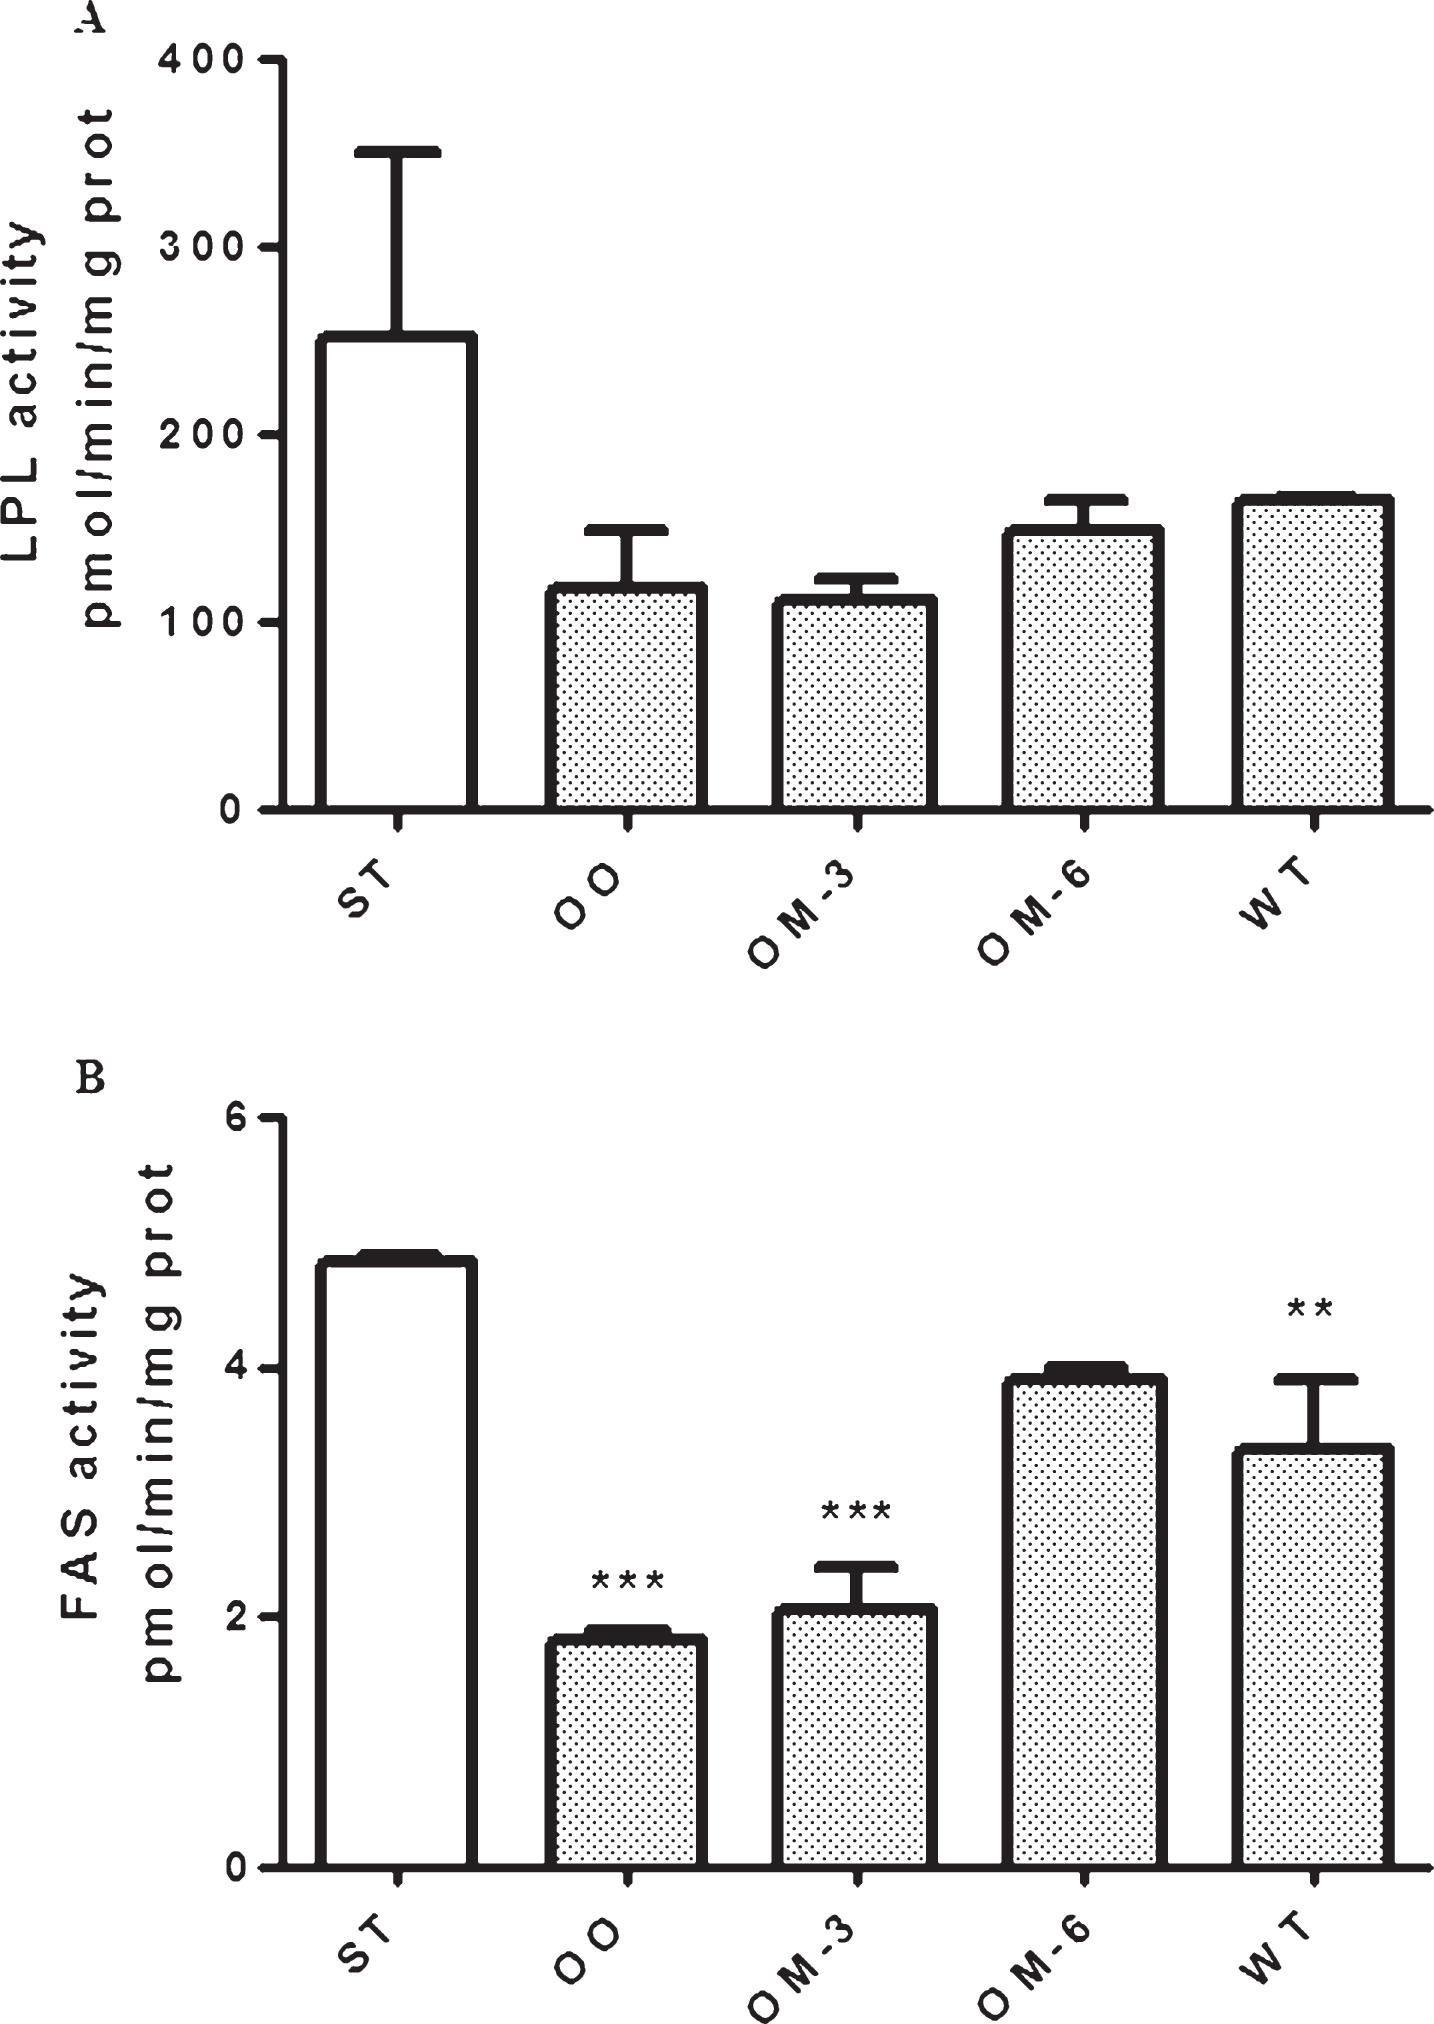 LPL (panel A) and FAS (panel B) enzymatic activity in adipose tissue from ApcMin/+ mice treated groups (ST = standard diet; OO = olive oil; OM-3 = omega-3 PUFAs; OM-6 = omega-6 PUFAs supplemented diet) and in the Wilde Type (WT) mice group. Data are presented as the mean±SE of ten animals for each group and expressed as pmol/min/mg total protein. **P < 0.03, ***P < 0.005 (one-way analysis of variance and Dunnett Post Test).